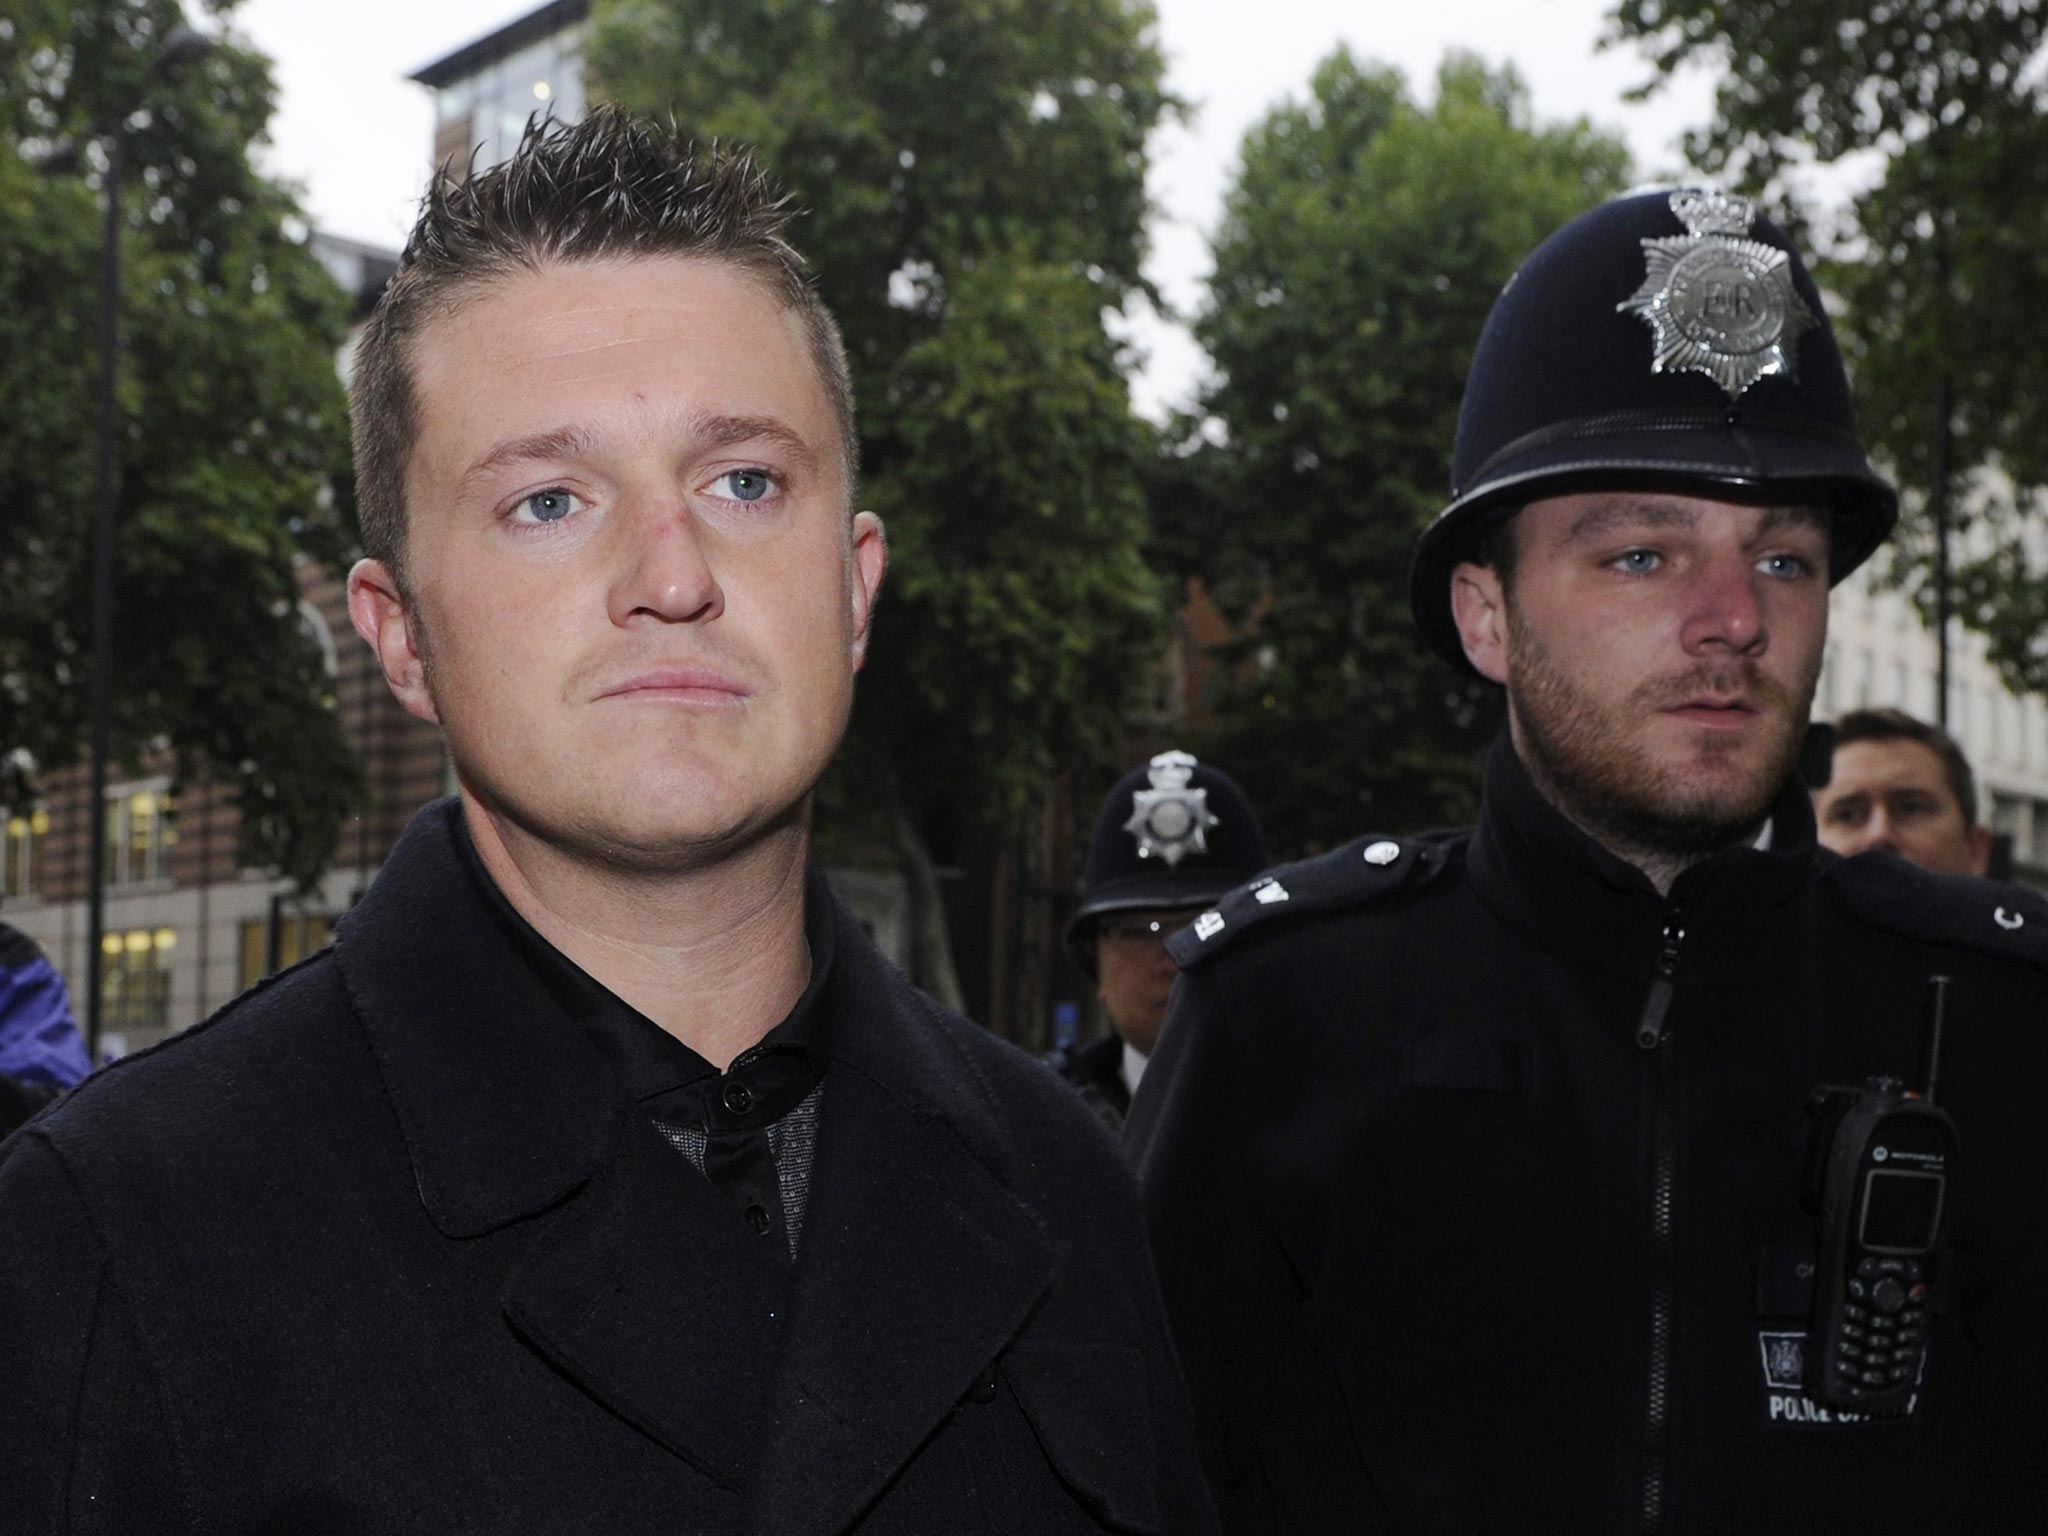 16 October 2013: Former English Defence League leader Tommy Robinson arrives at the City of Westminster Magistrates court in London